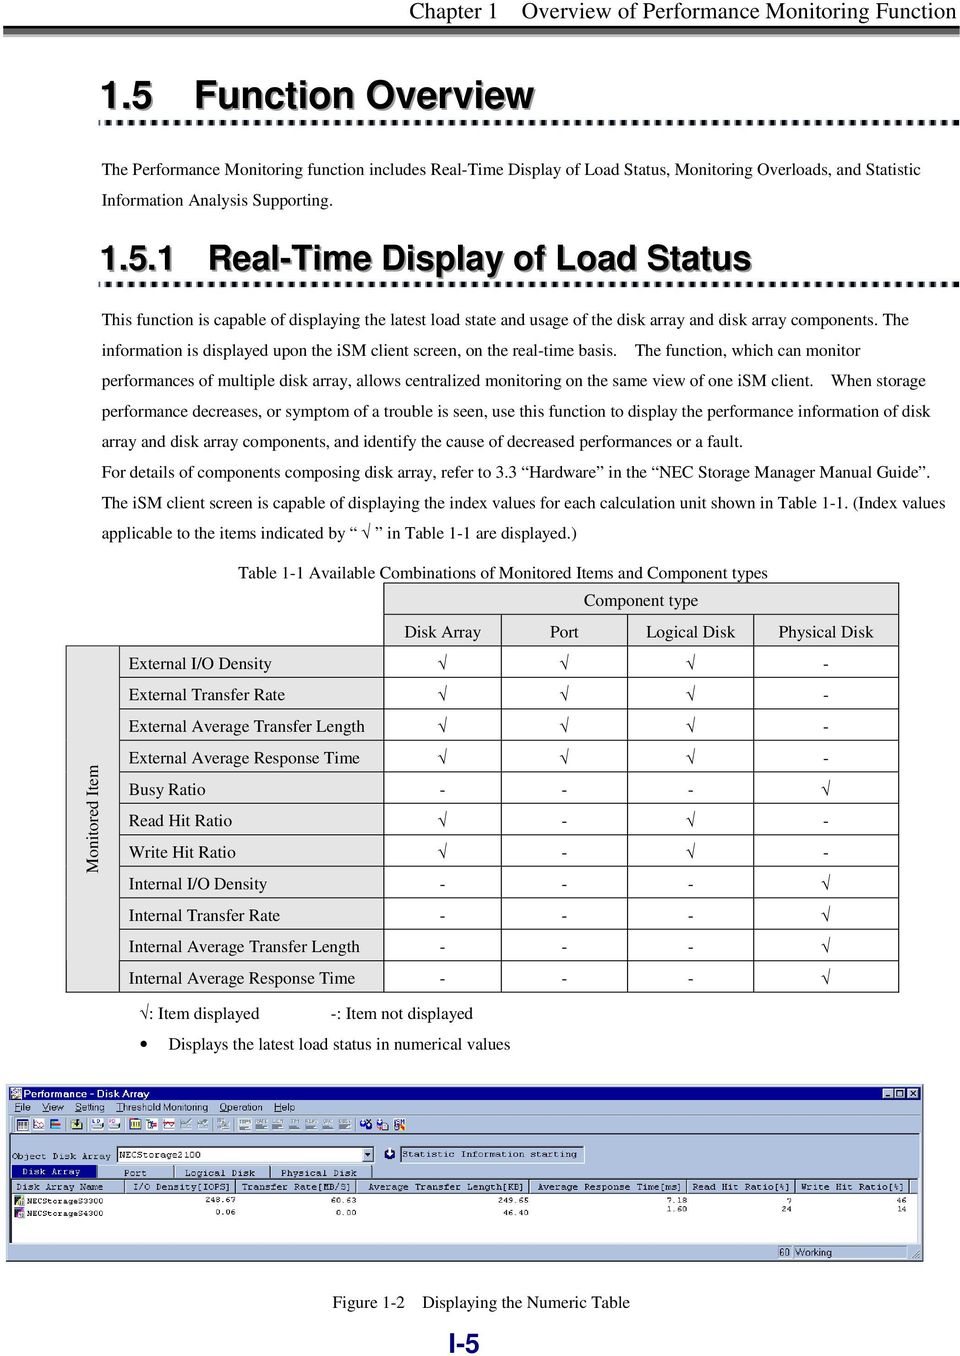 The information is displayed upon the ism client screen, on the real-time basis.